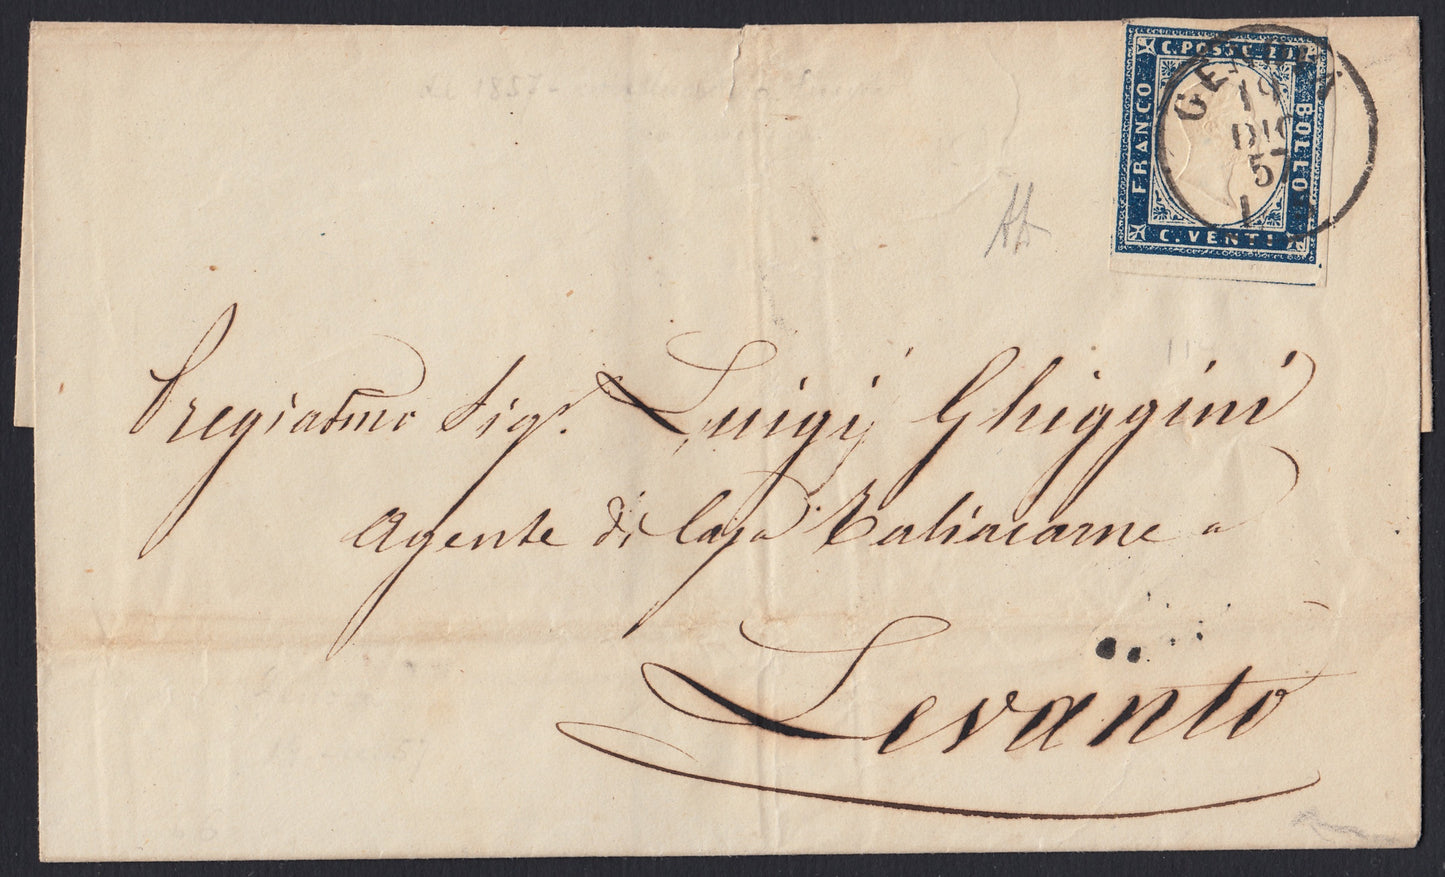 196 - 1857 - Letter sent from Genoa to Levanto 12/19/57 franked with c. 20 Greyish blue I table edition 1857 (15A) 